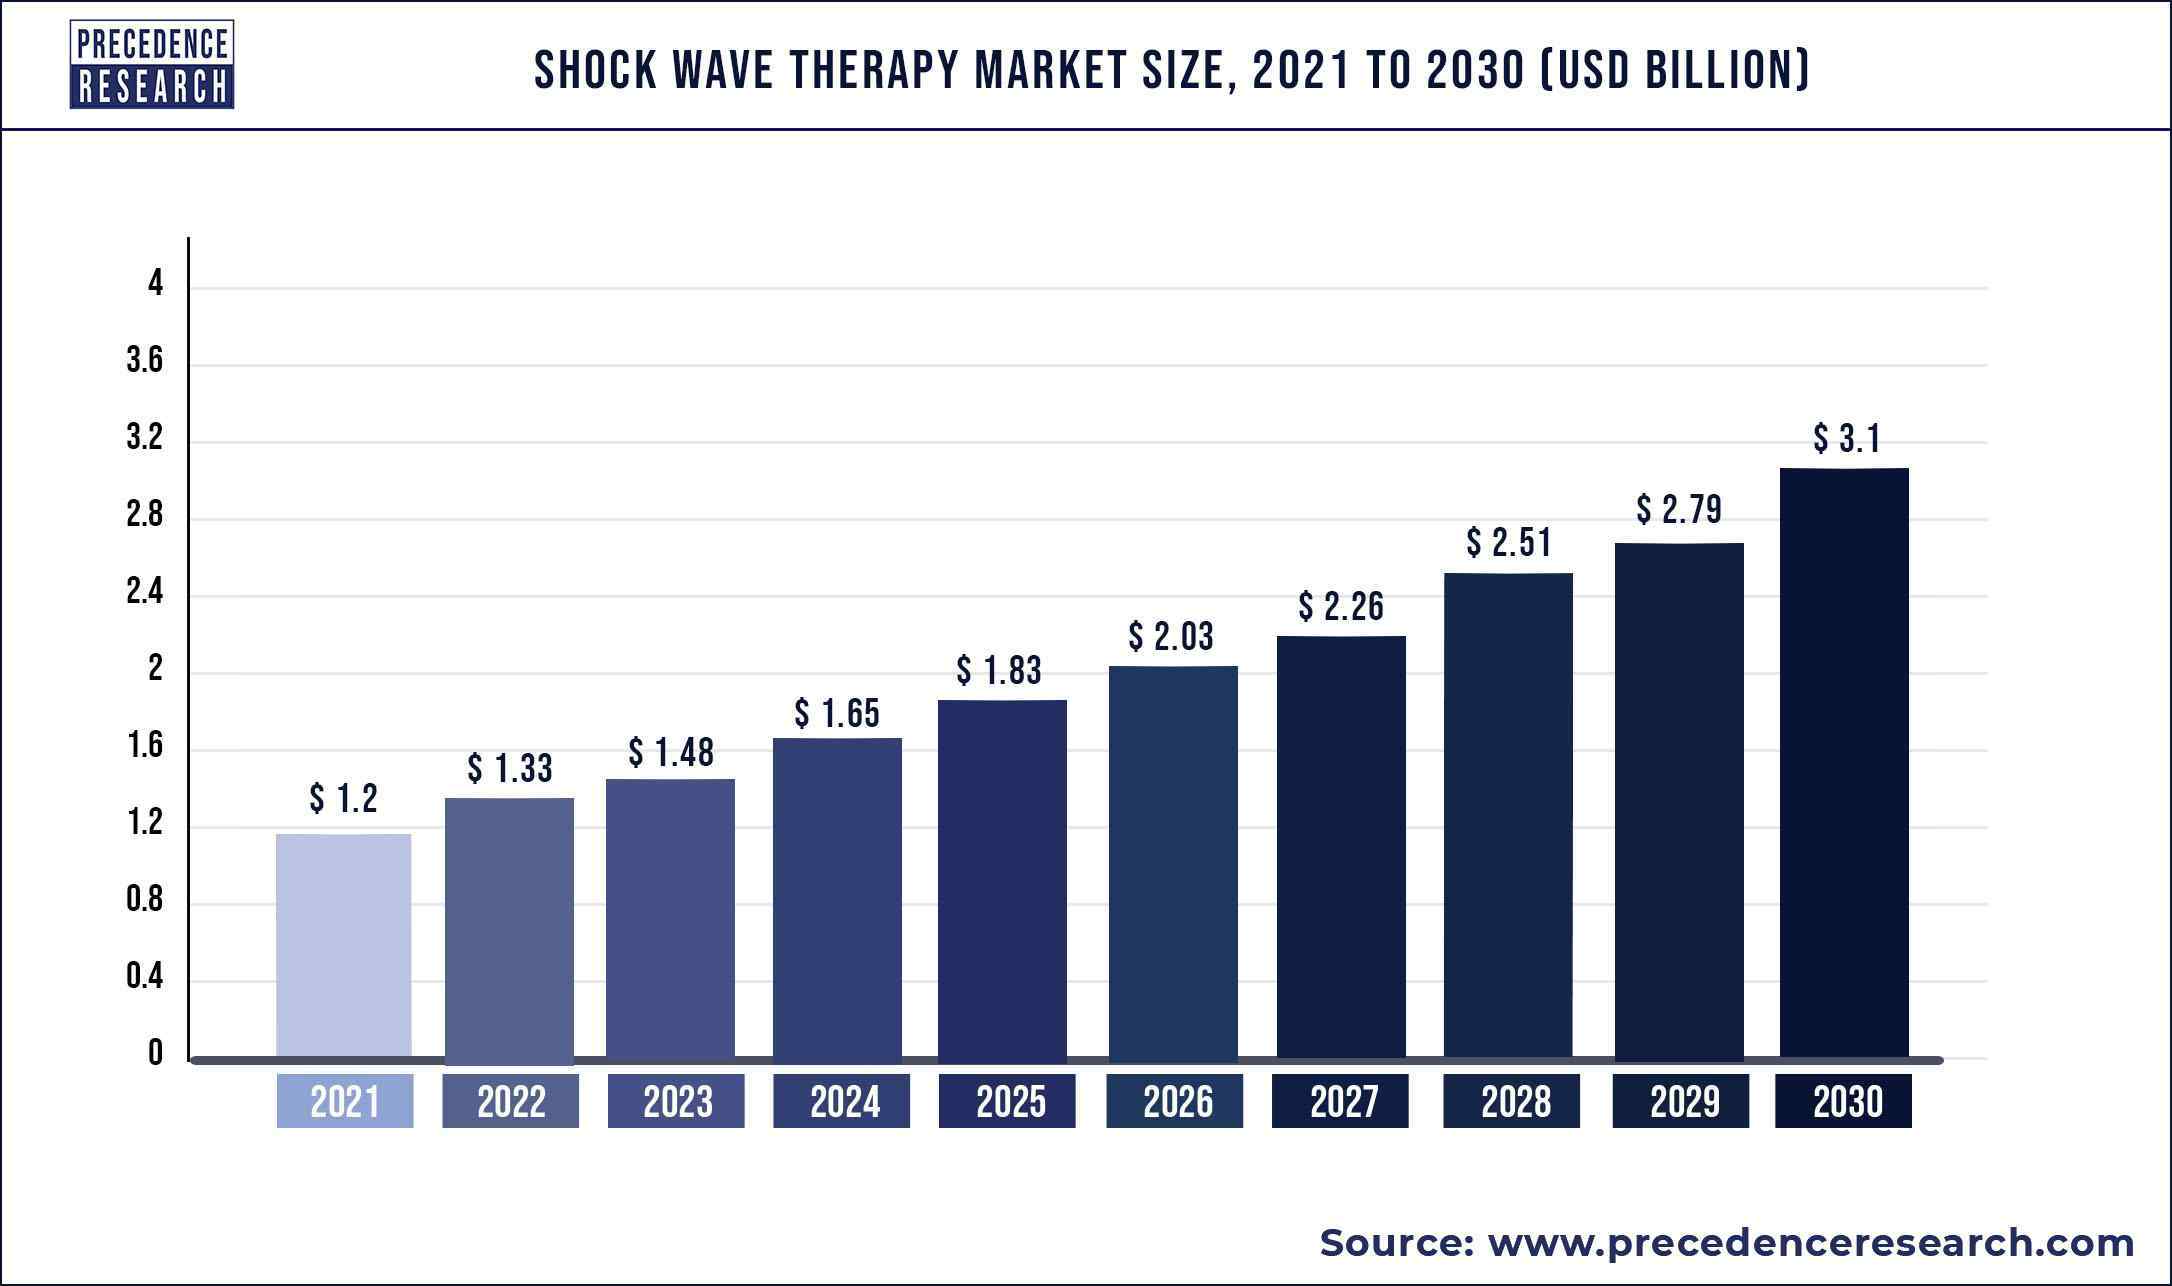 Shock Wave Therapy Market Size is Forecasted to Reach US$ 3.1 Billion by 2030